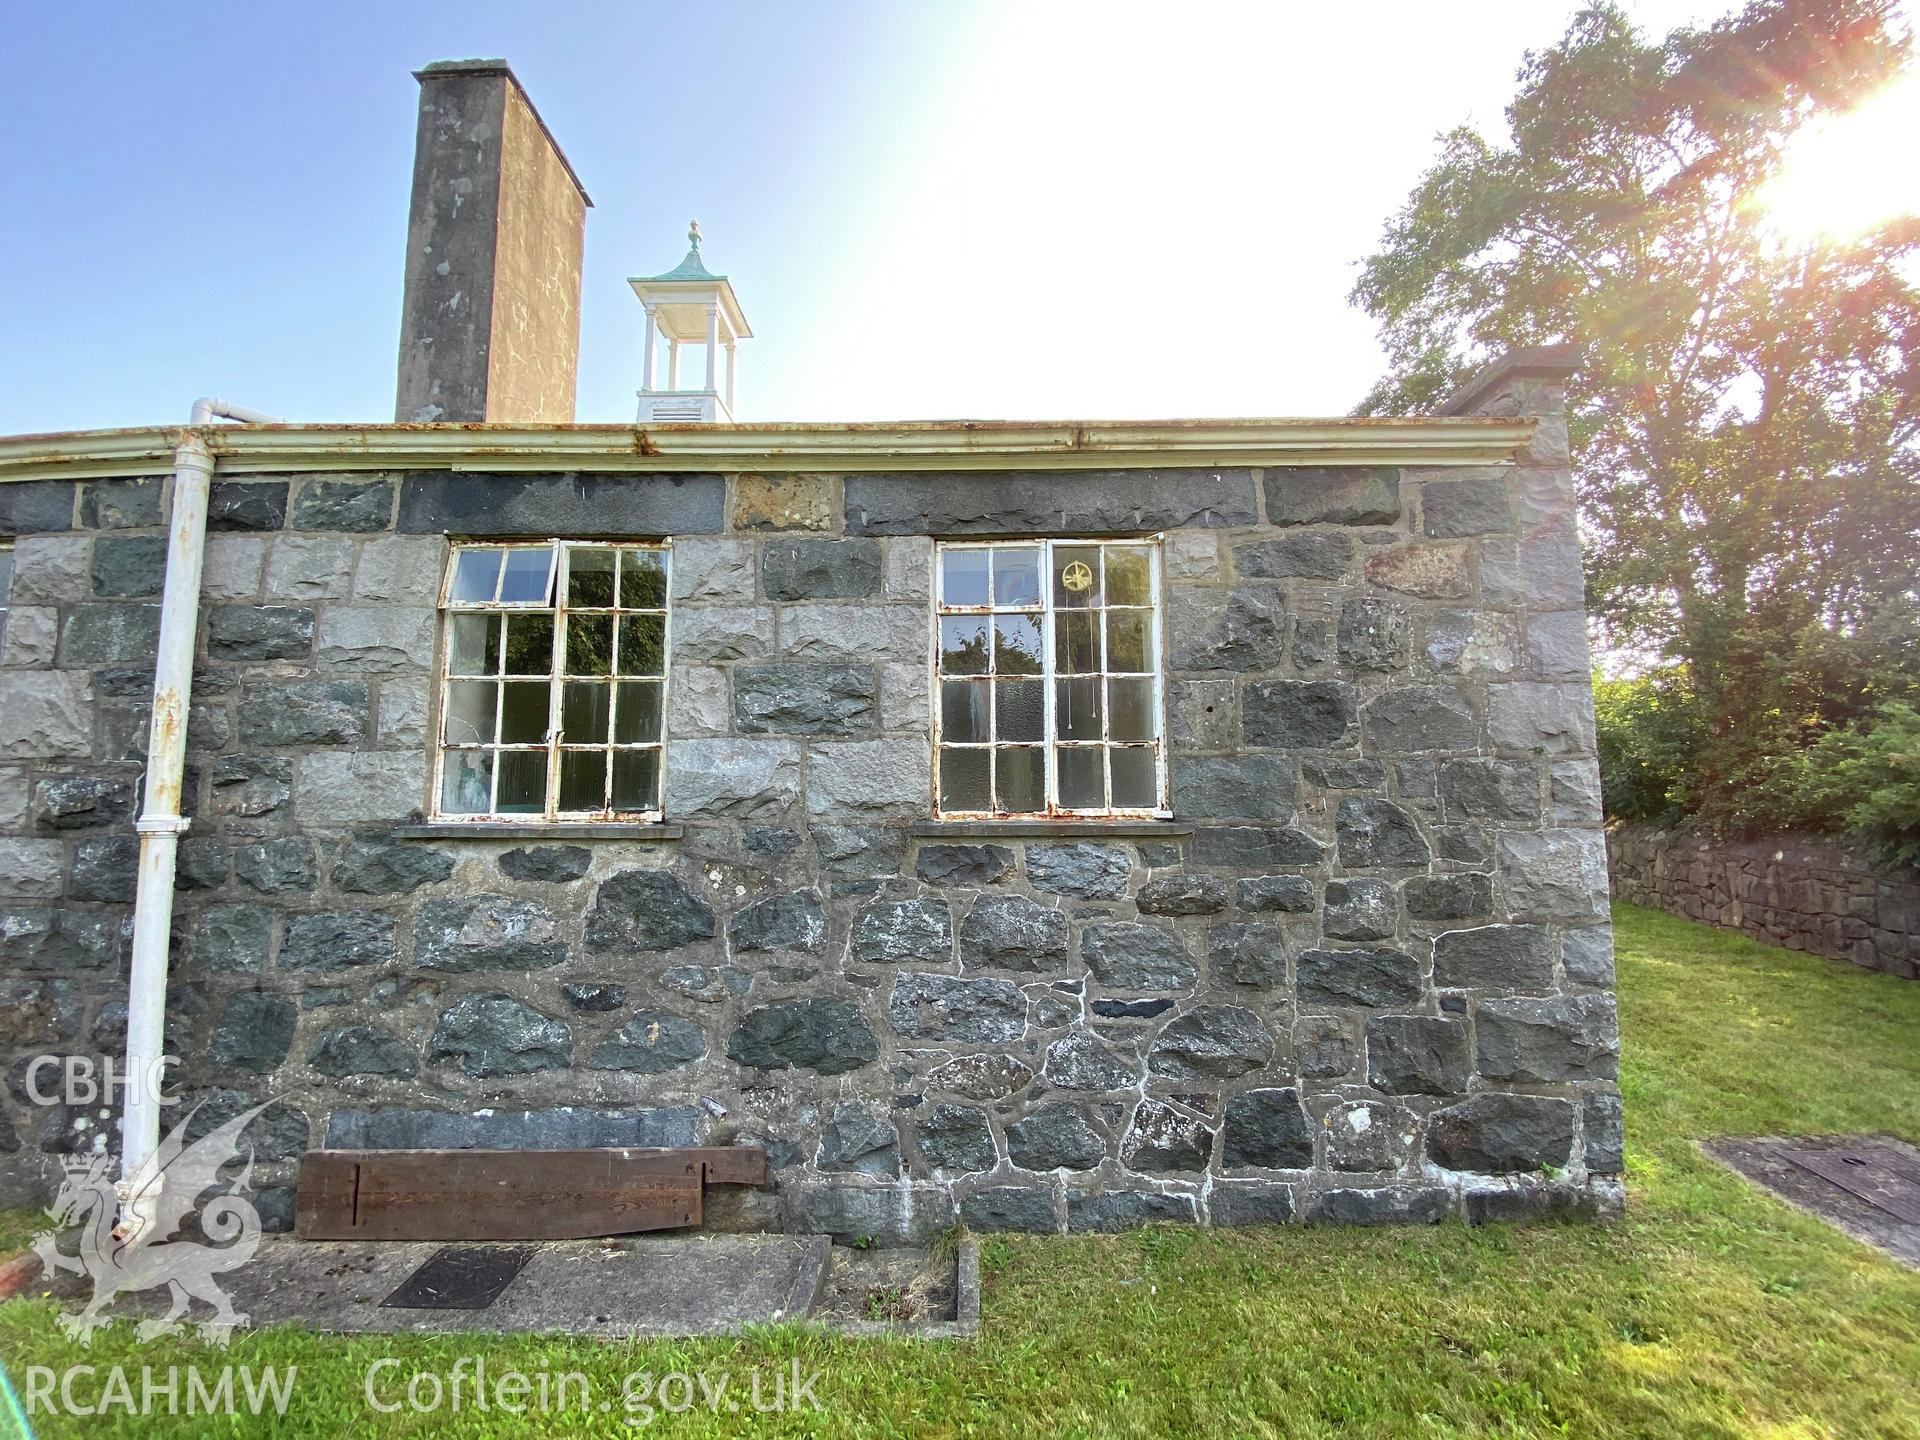 Colour photograph showing West elevation, south end detail - part of a photographic record relating to Moriah Chapel, Llanystumdwy, produced as a condition of planning consent (Planning Reference C21/0420/41/LL; Gwynedd Council).